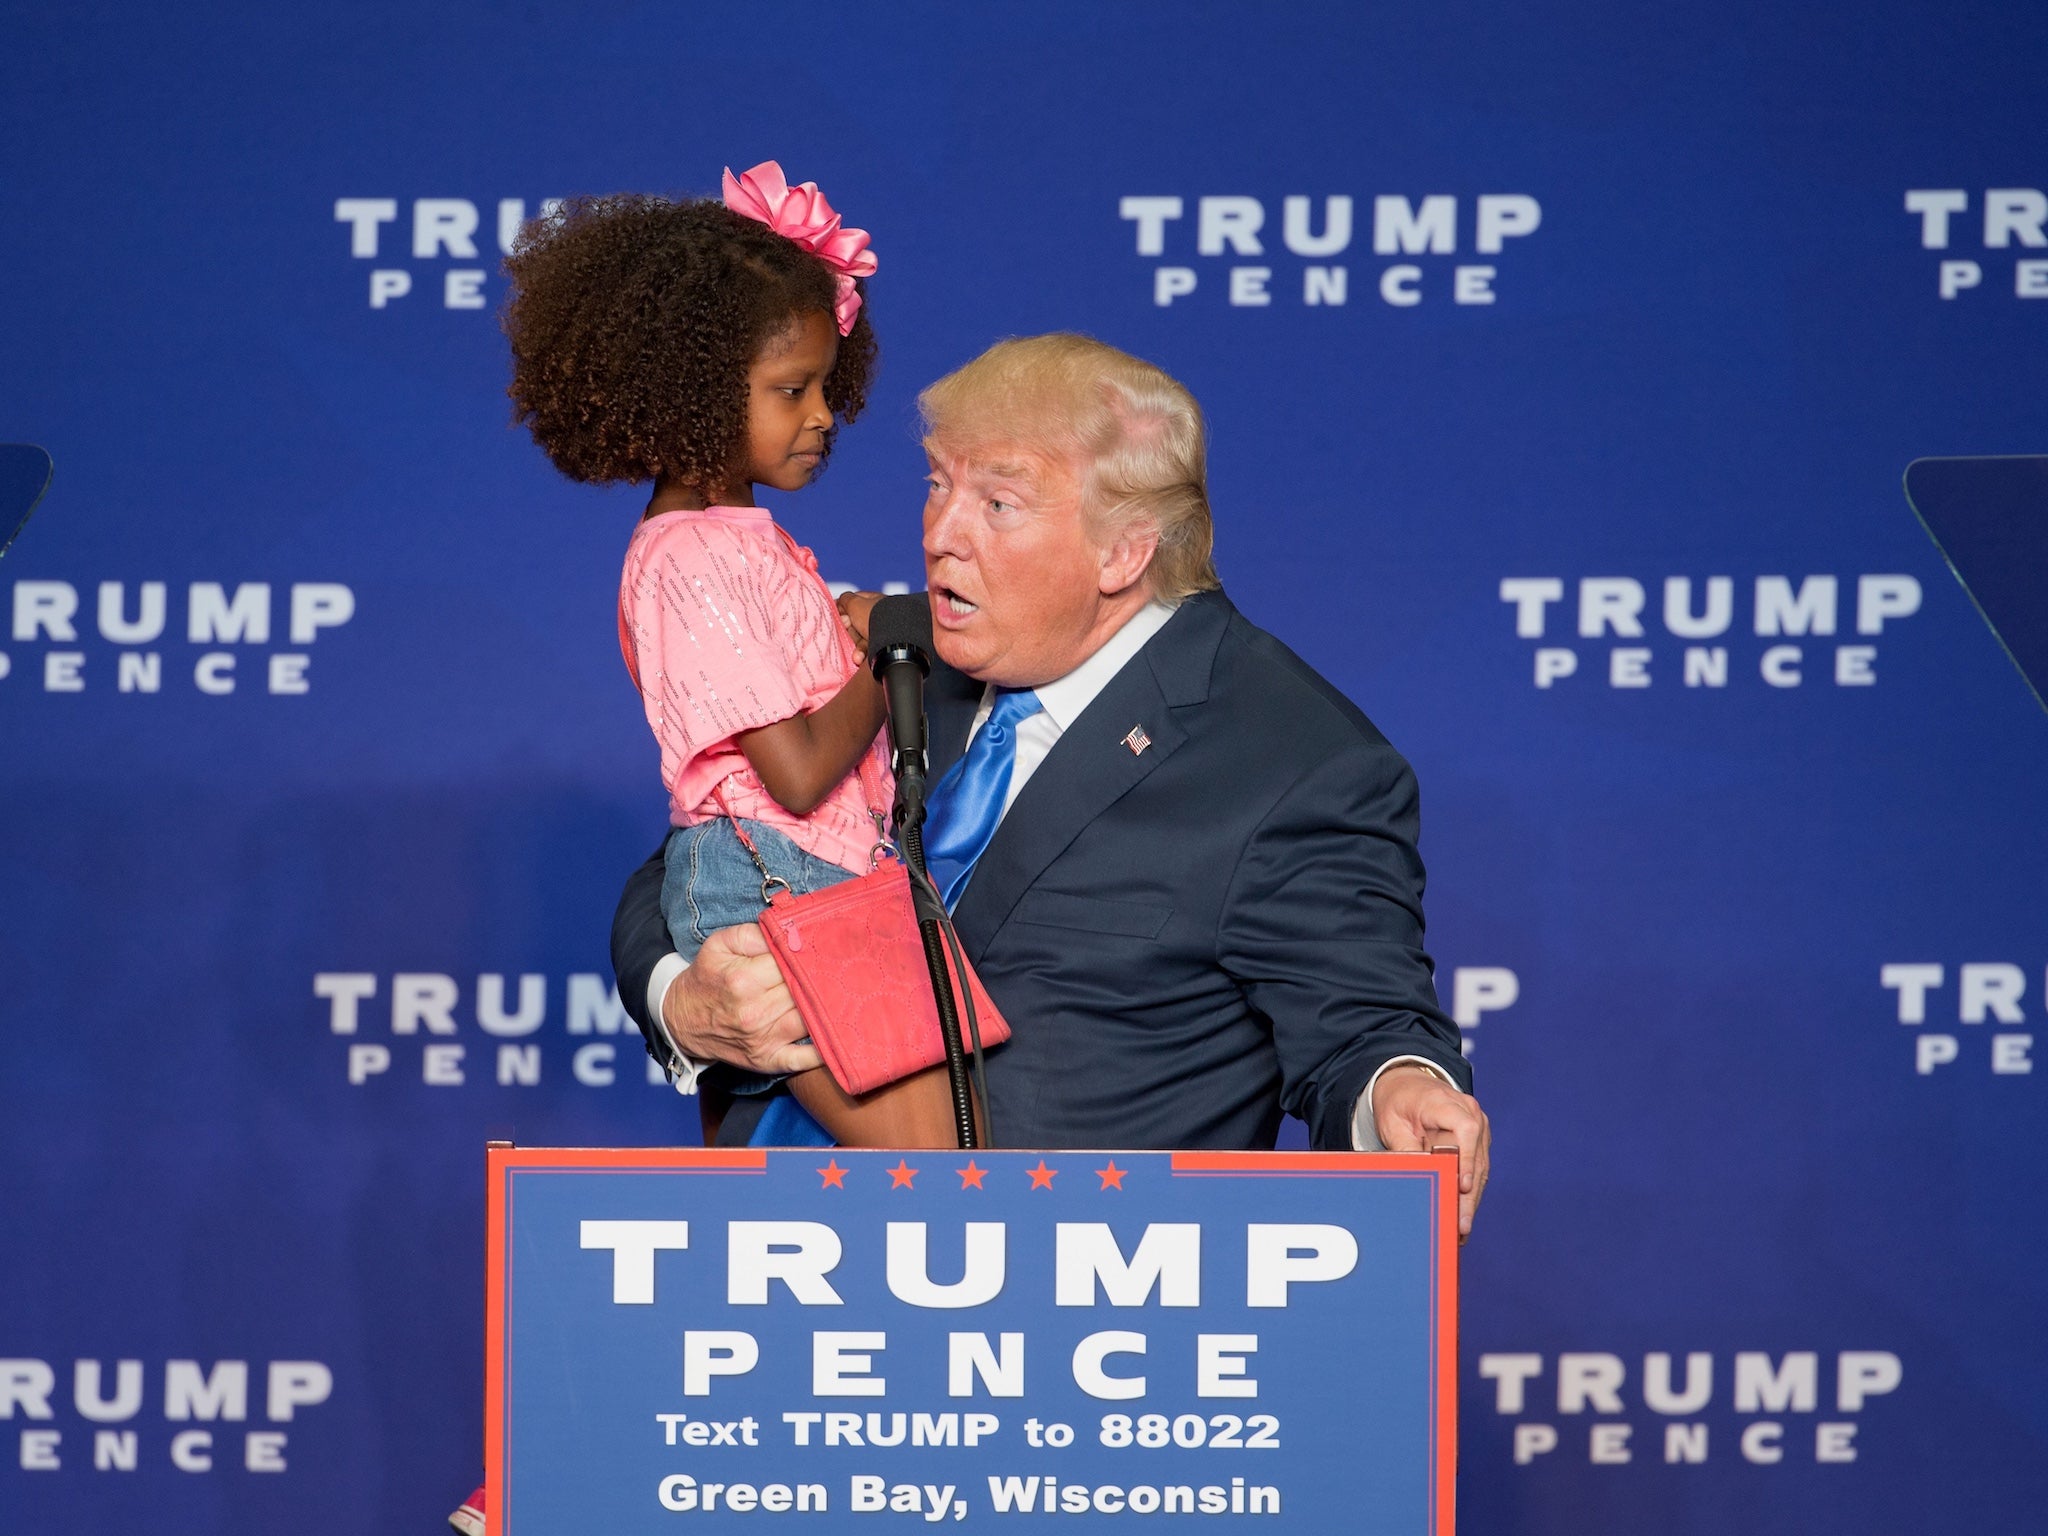 Republican presidential nominee Donald Trump holds a child as he speaks during a rally at the KI Convention Center on October 17, 2016 in Green Bay, Wisconsin